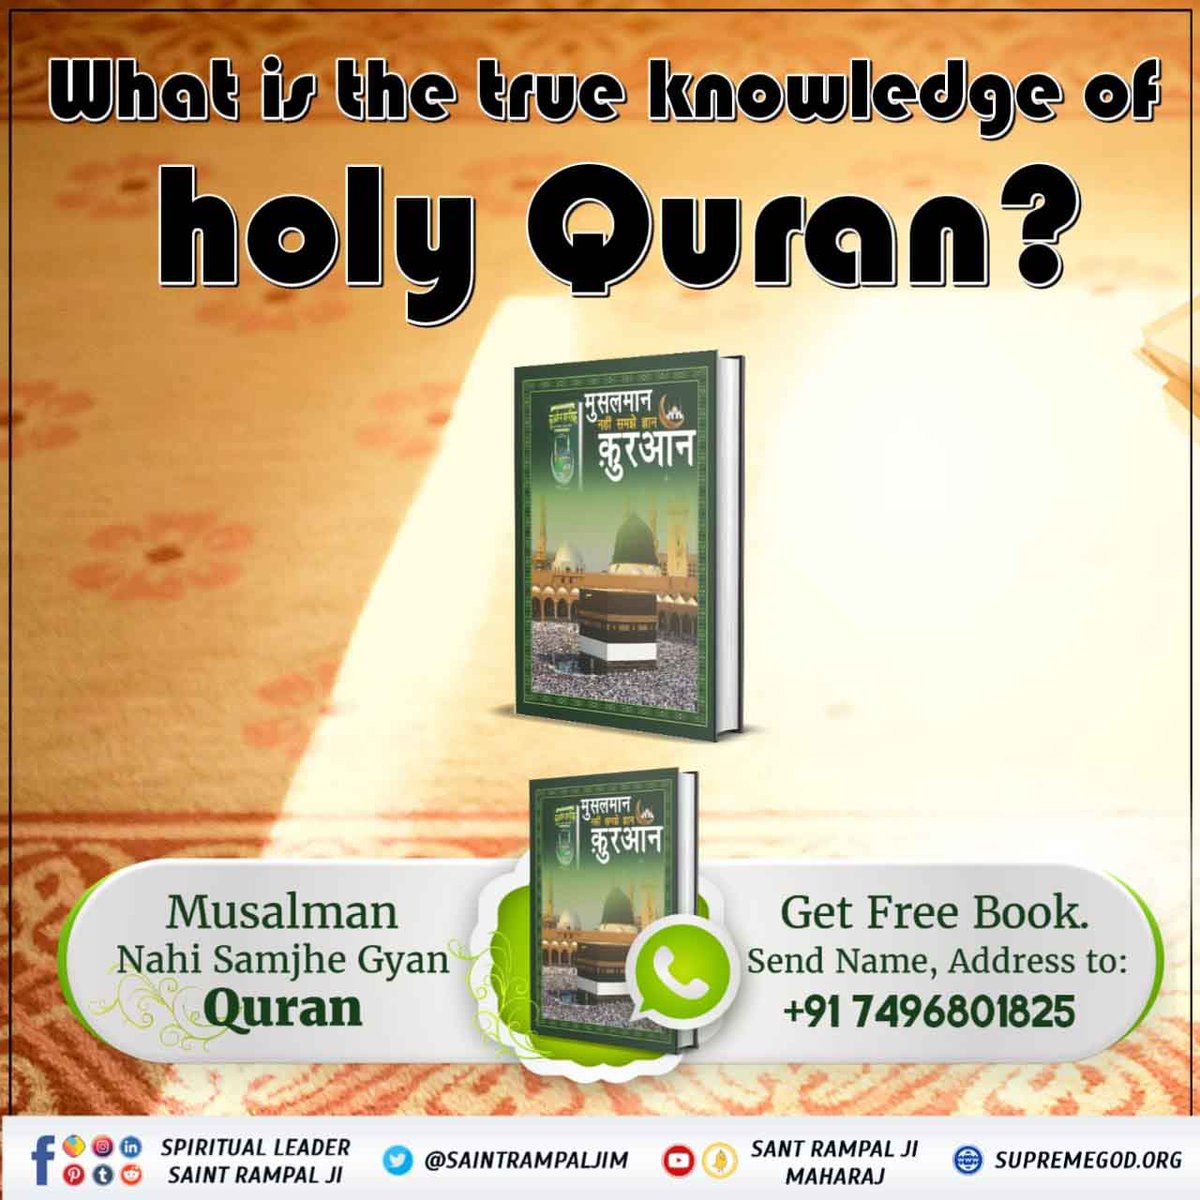 #GodMorningWenasday 
#HiddenSecrets_Of_TheQuran
Whom the Muslim brothers believe in God, whom he tells above himself, the real God?